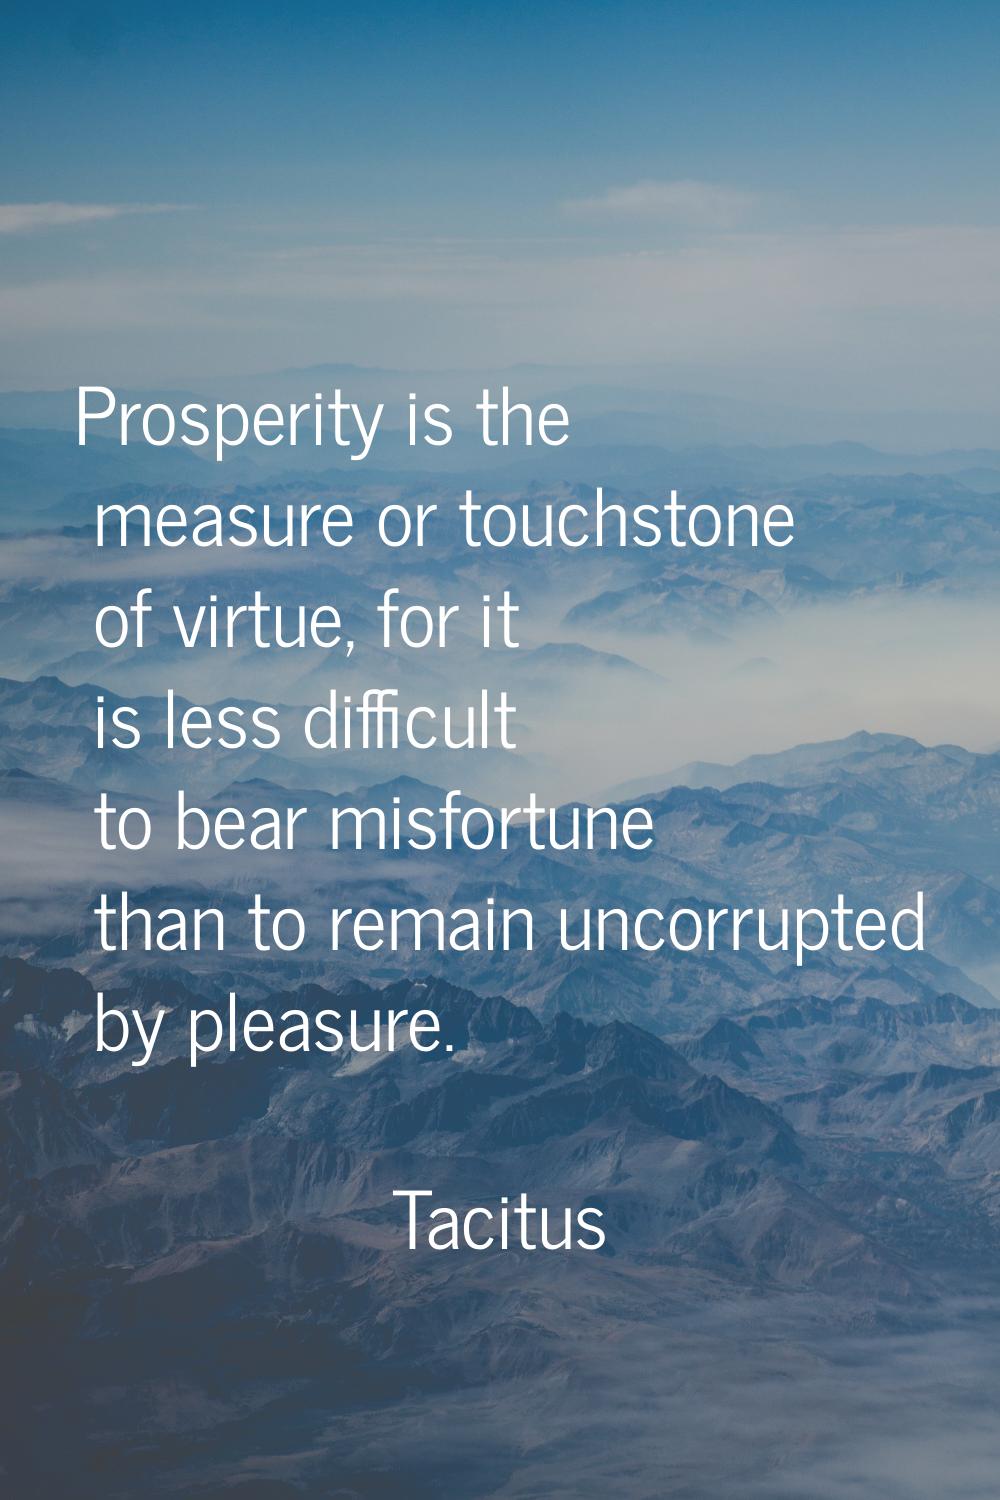 Prosperity is the measure or touchstone of virtue, for it is less difficult to bear misfortune than